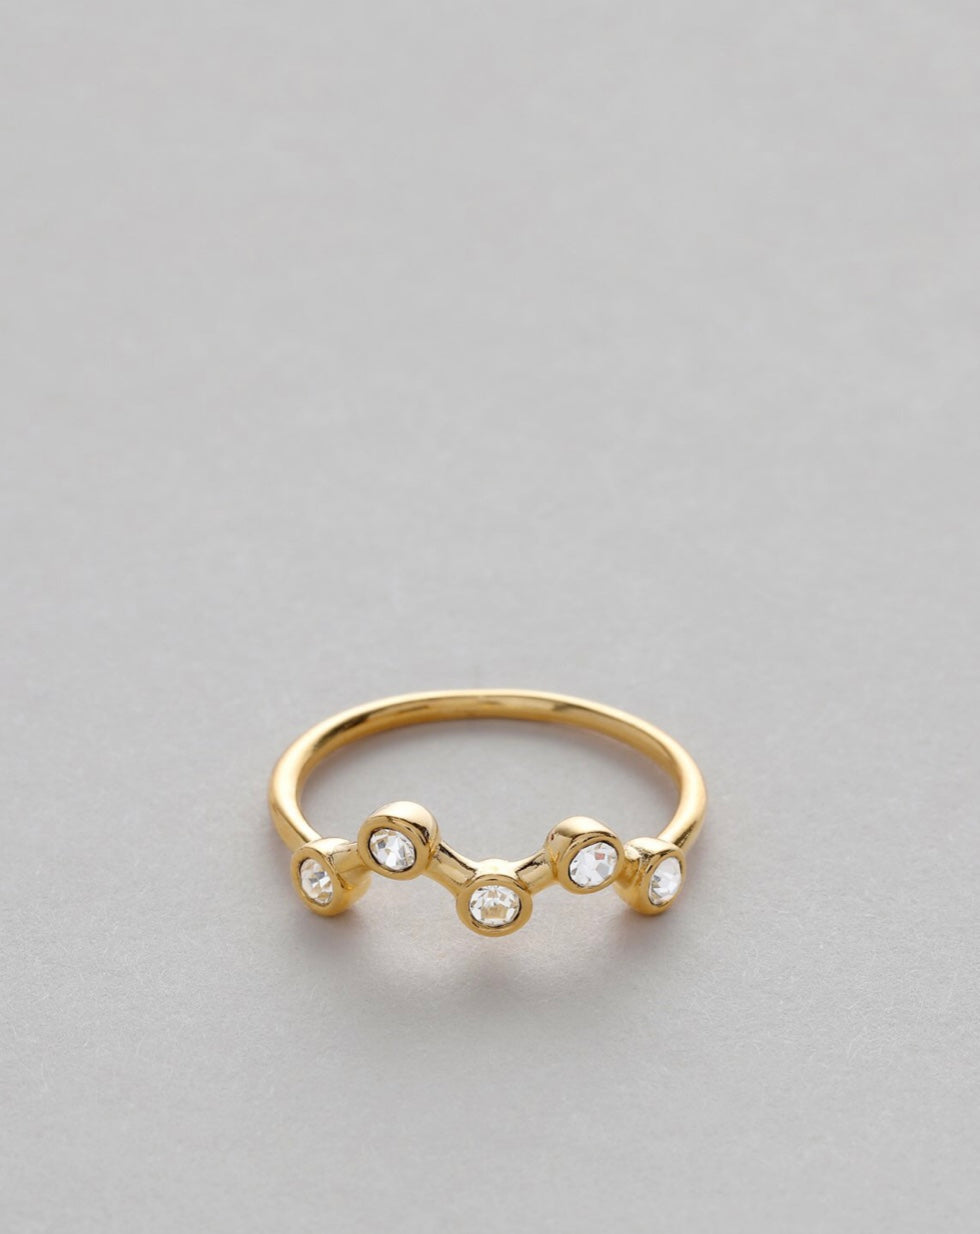 Create Your Own Constellation Ring